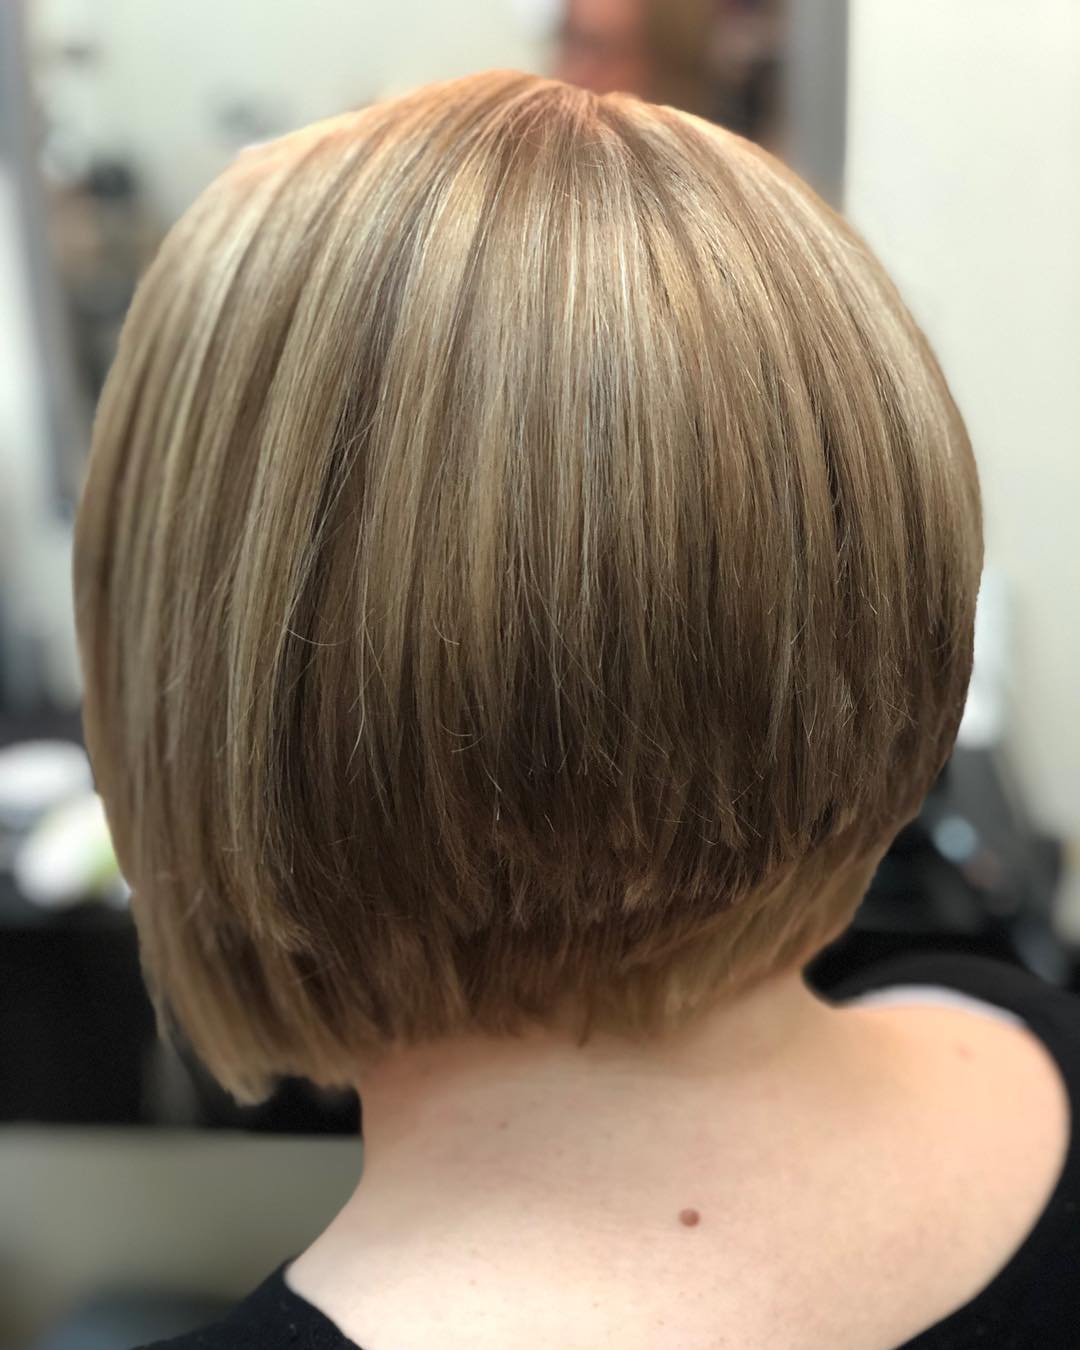 Stacked Bob 107 Long stacked bob | Medium length stacked bob | Pictures of stacked bob haircuts front and back Stacked Bob Hairstyles for Women